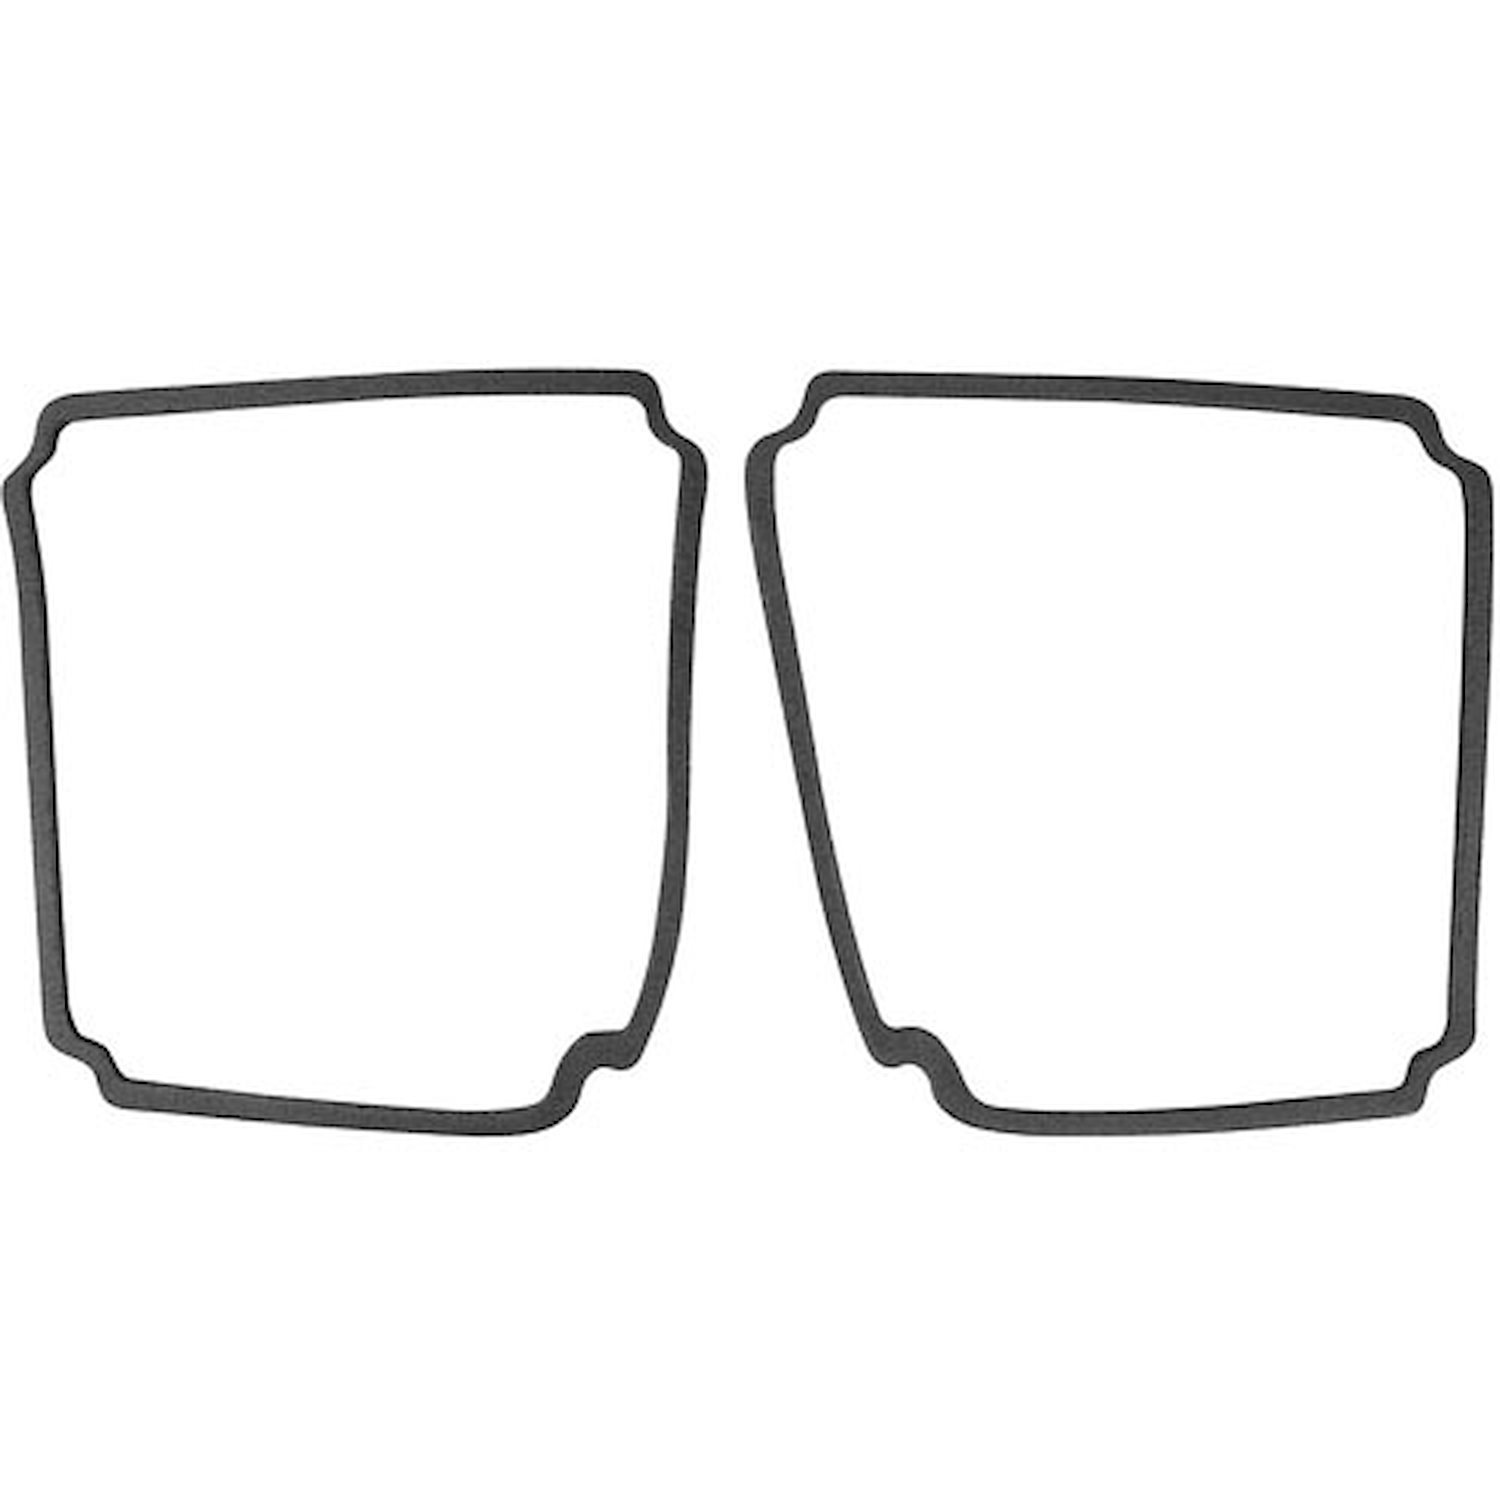 Tail Lamp Lens Gaskets 1969 Chevelle